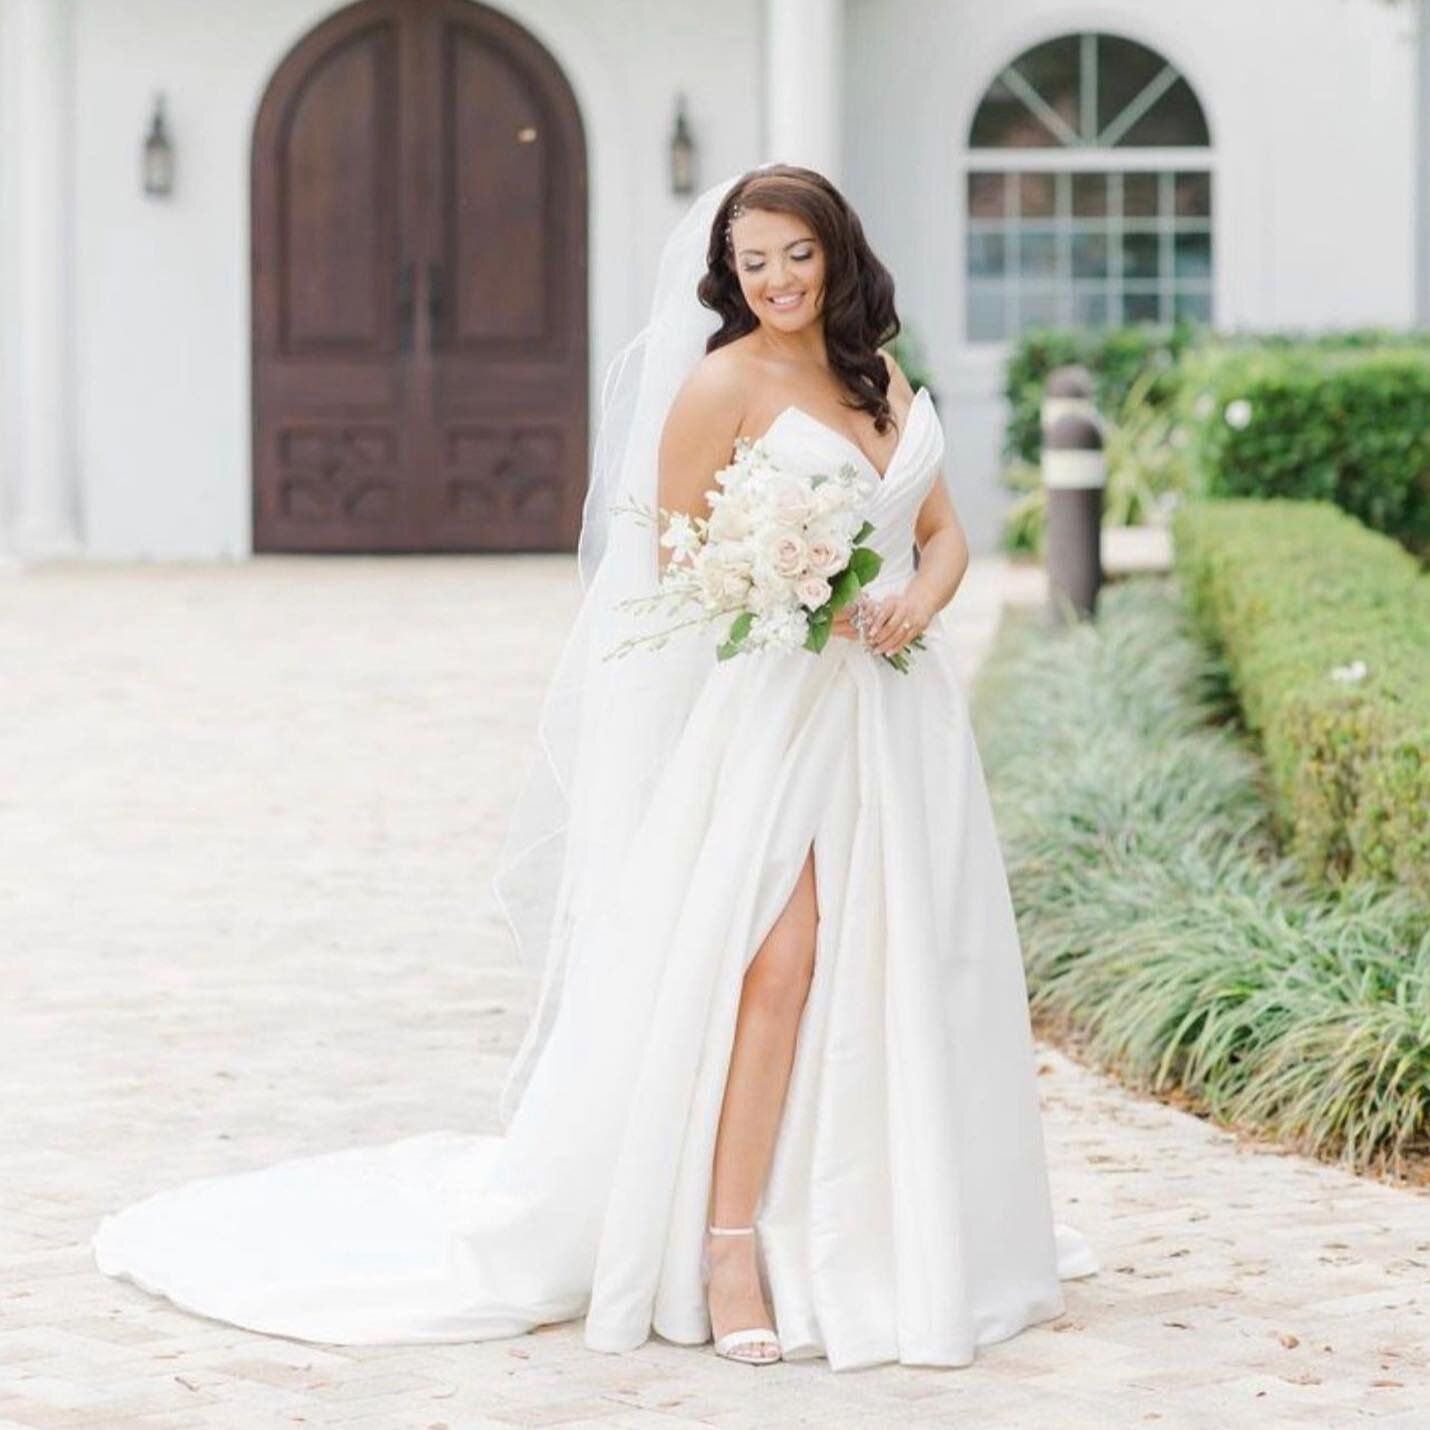 You can never go wrong with a classic bridal look. Congratulations Kelsey! 

Gown: AUDREY
#gavinchristiansonbridal #realGCBRIDE #NCbride #ncweddings